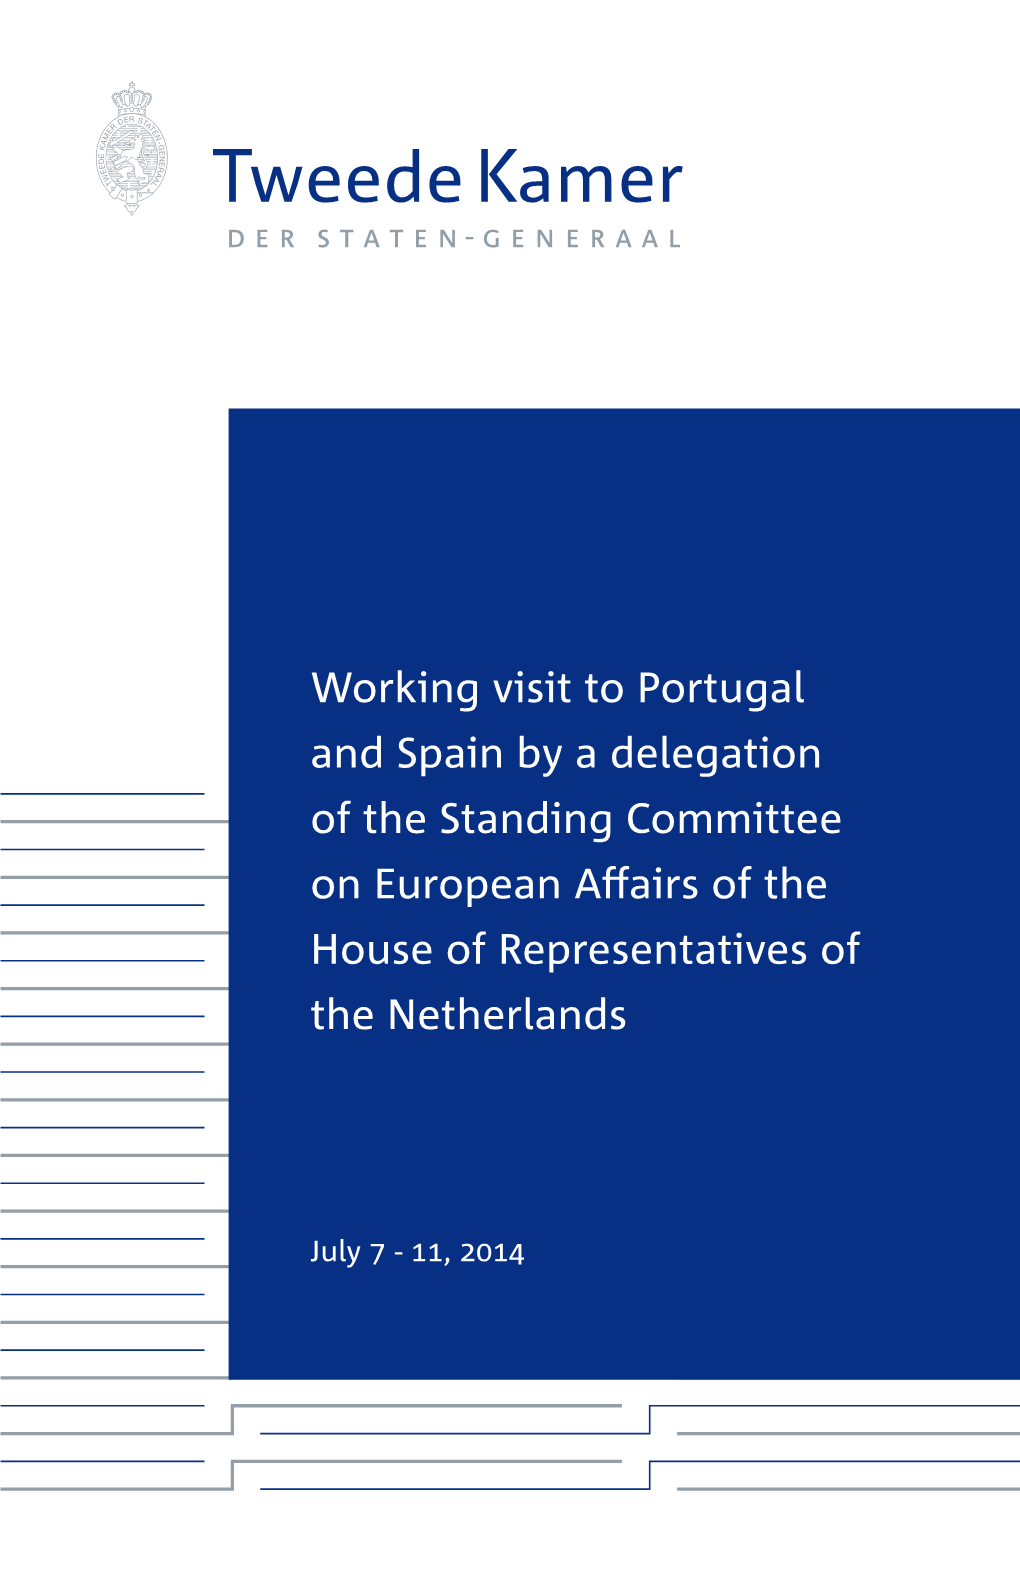 Working Visit to Portugal and Spain by a Delegation of the Standing Committee on European Affairs of the House of Representatives of the Netherlands